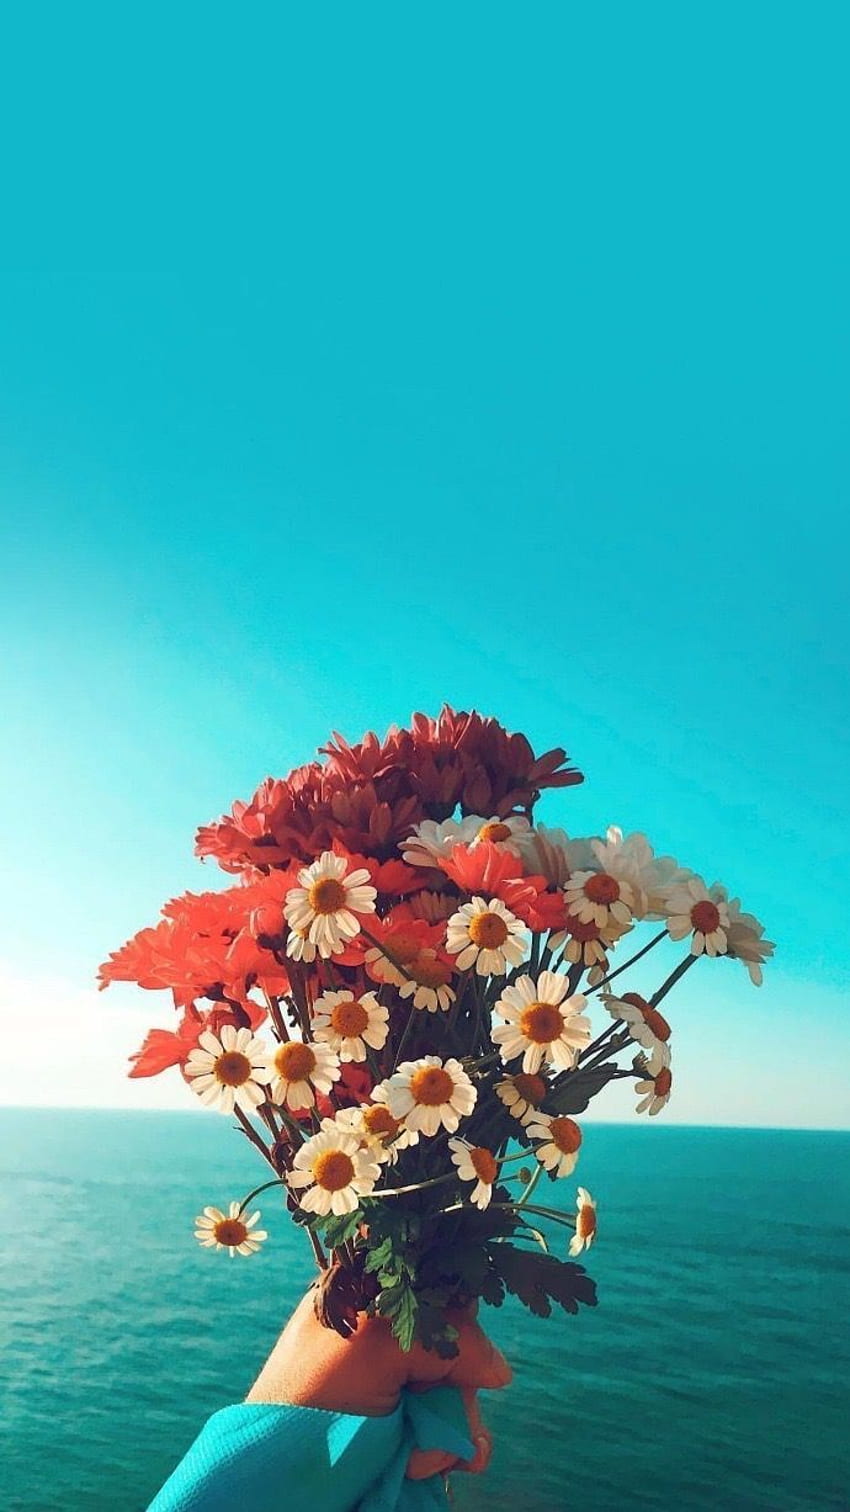 A person holding a bouquet of flowers in front of the ocean - Bright